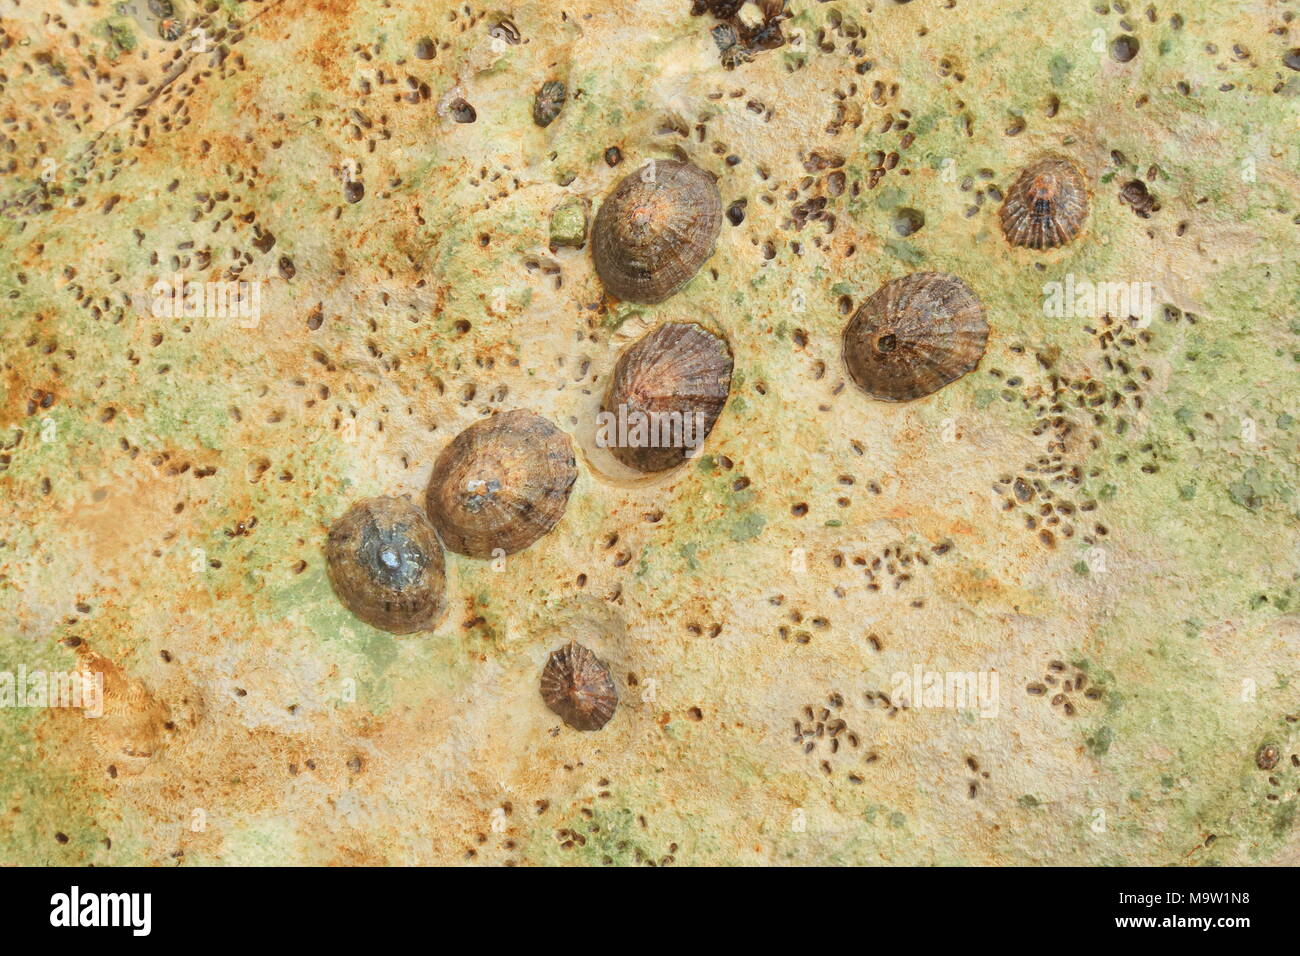 Group of common limpets (Patella vulgata) attached to colourful rock during low tide Stock Photo